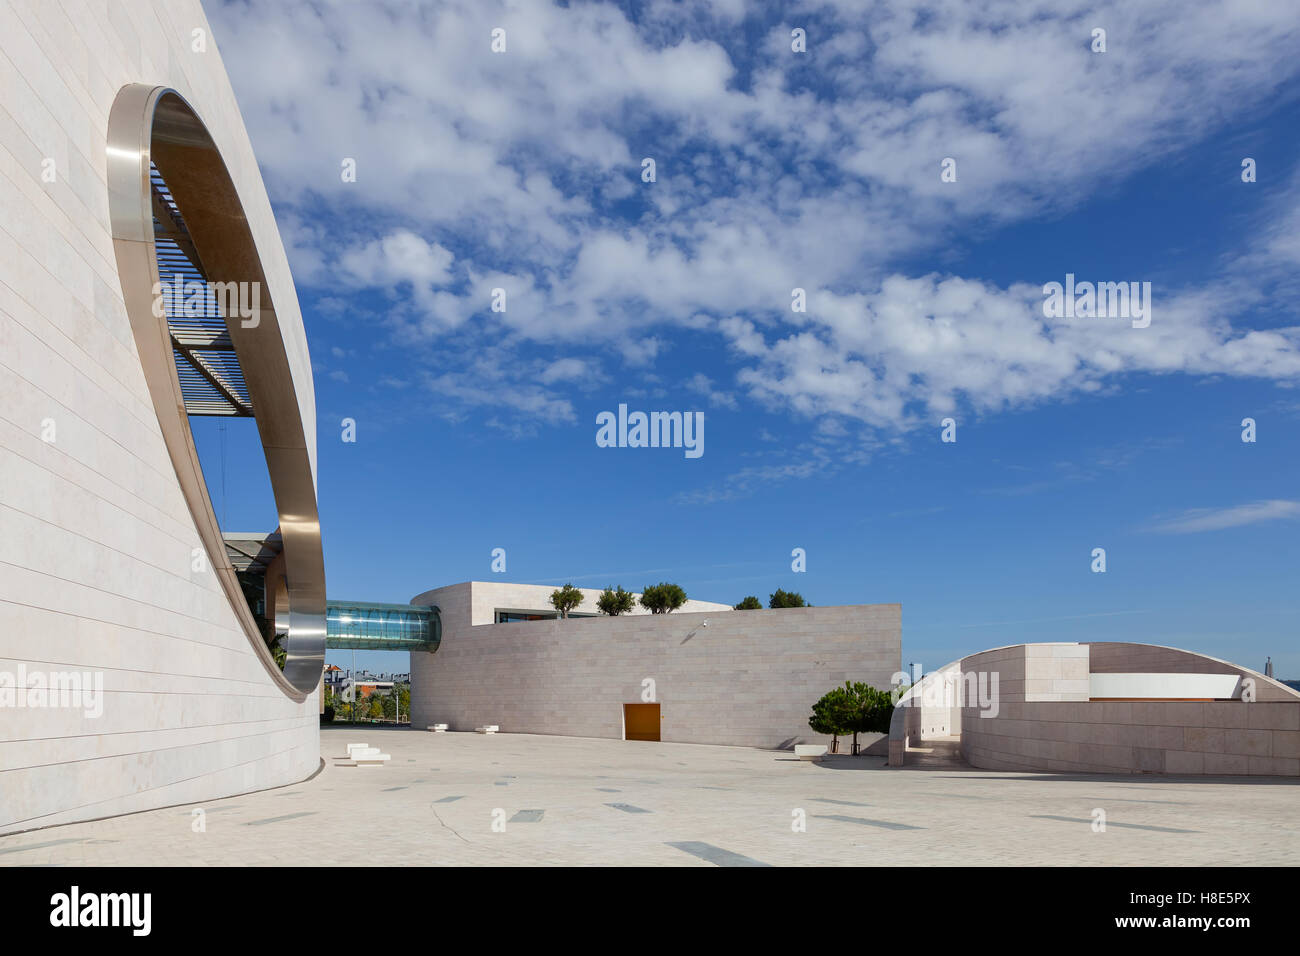 Champalimaud Foundation, Centre for the Unknown. Neuroscience, oncology and visual impairment biomedical research center. Lisbon Stock Photo